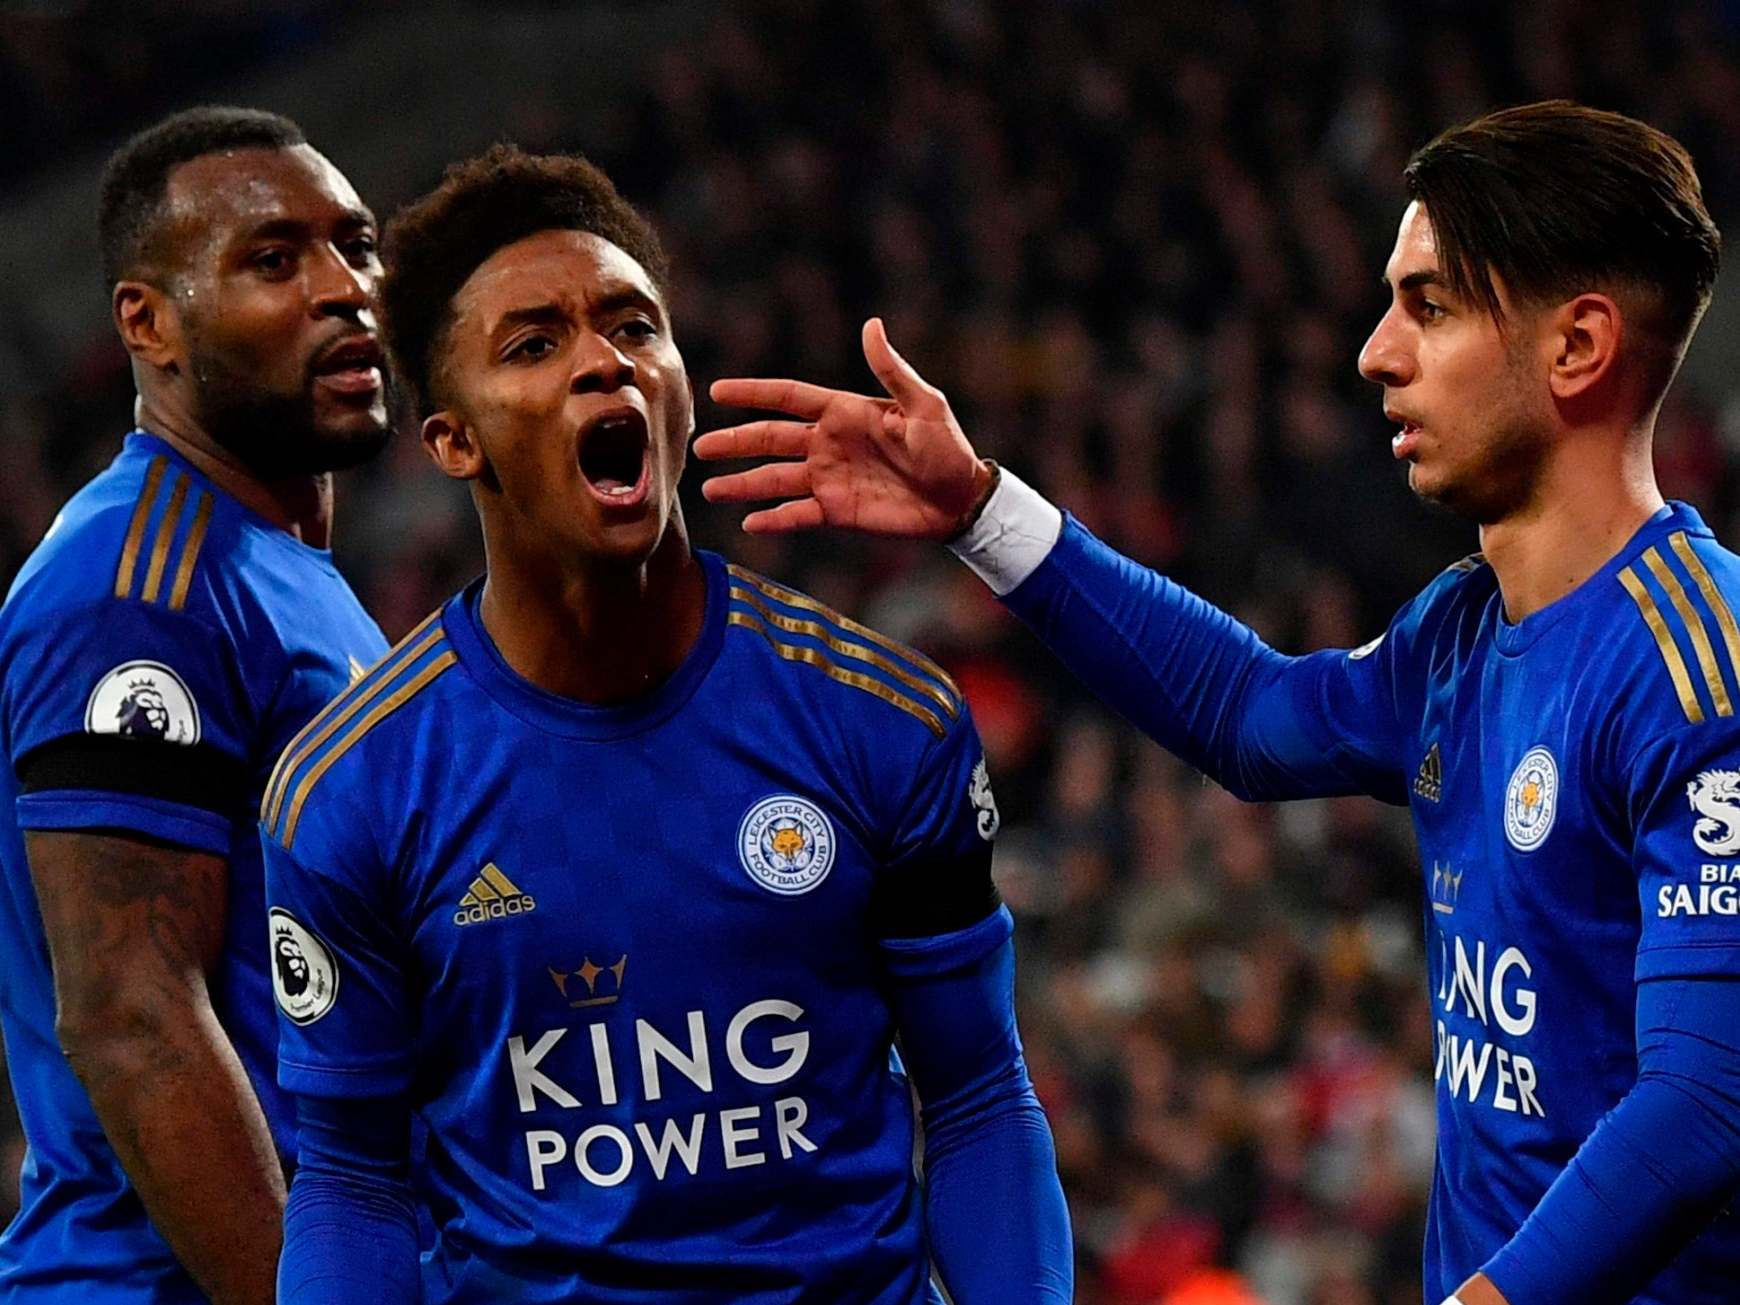 West Ham vs Leicester report Demarai Gray fires Foxes to win to heap pressure on Manuel Pellegrini The Independent The Independent